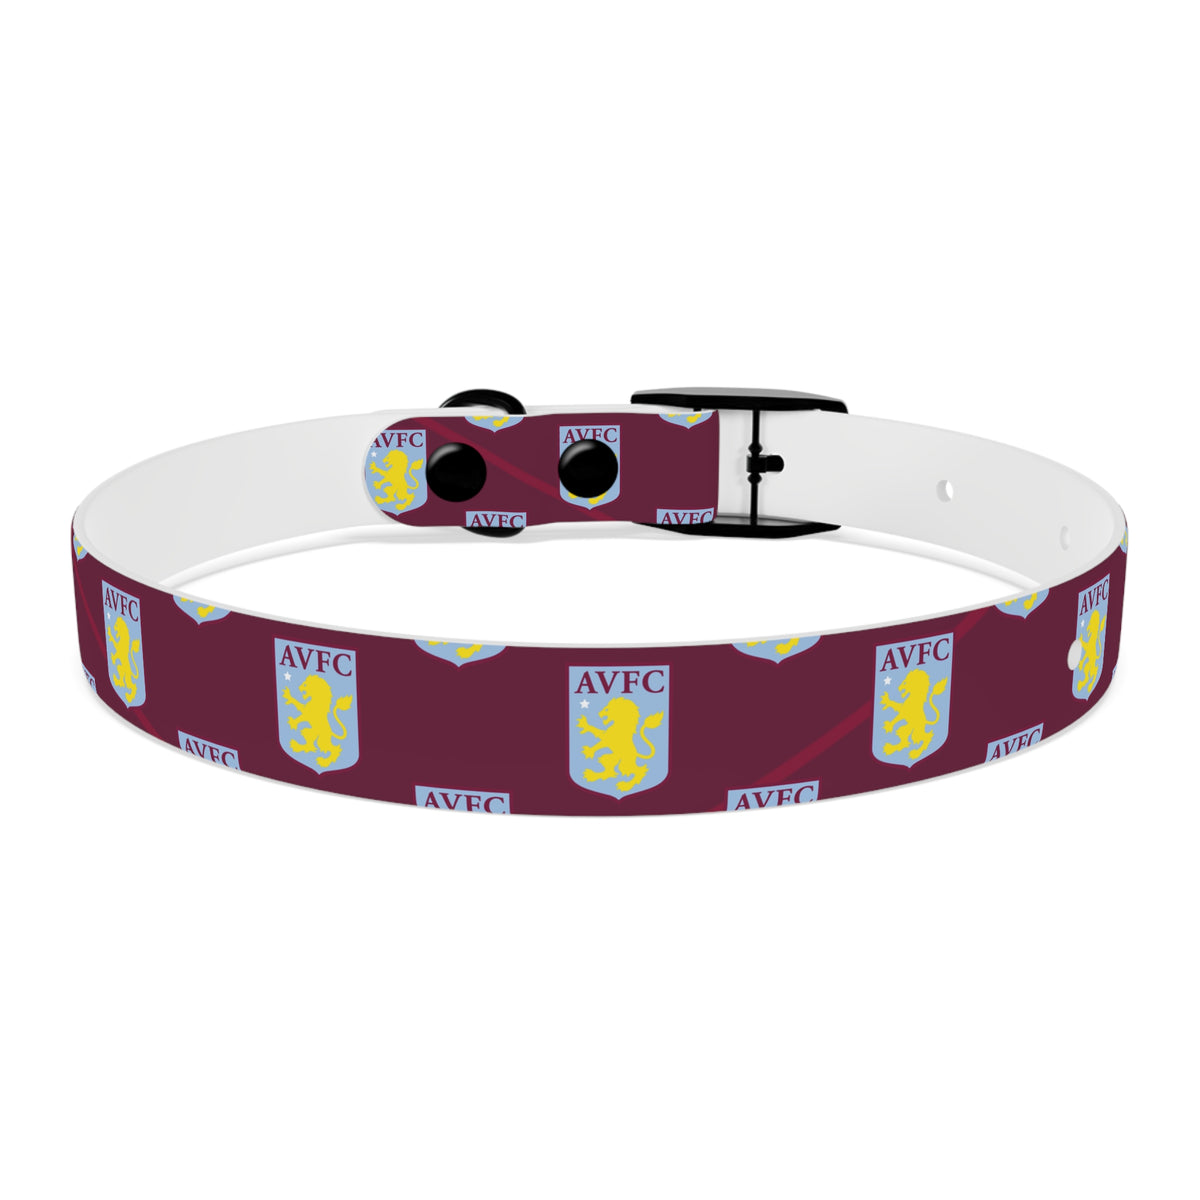 Aston Villa 23 Home Inspired Waterproof Dog Collar - 3 Red Rovers